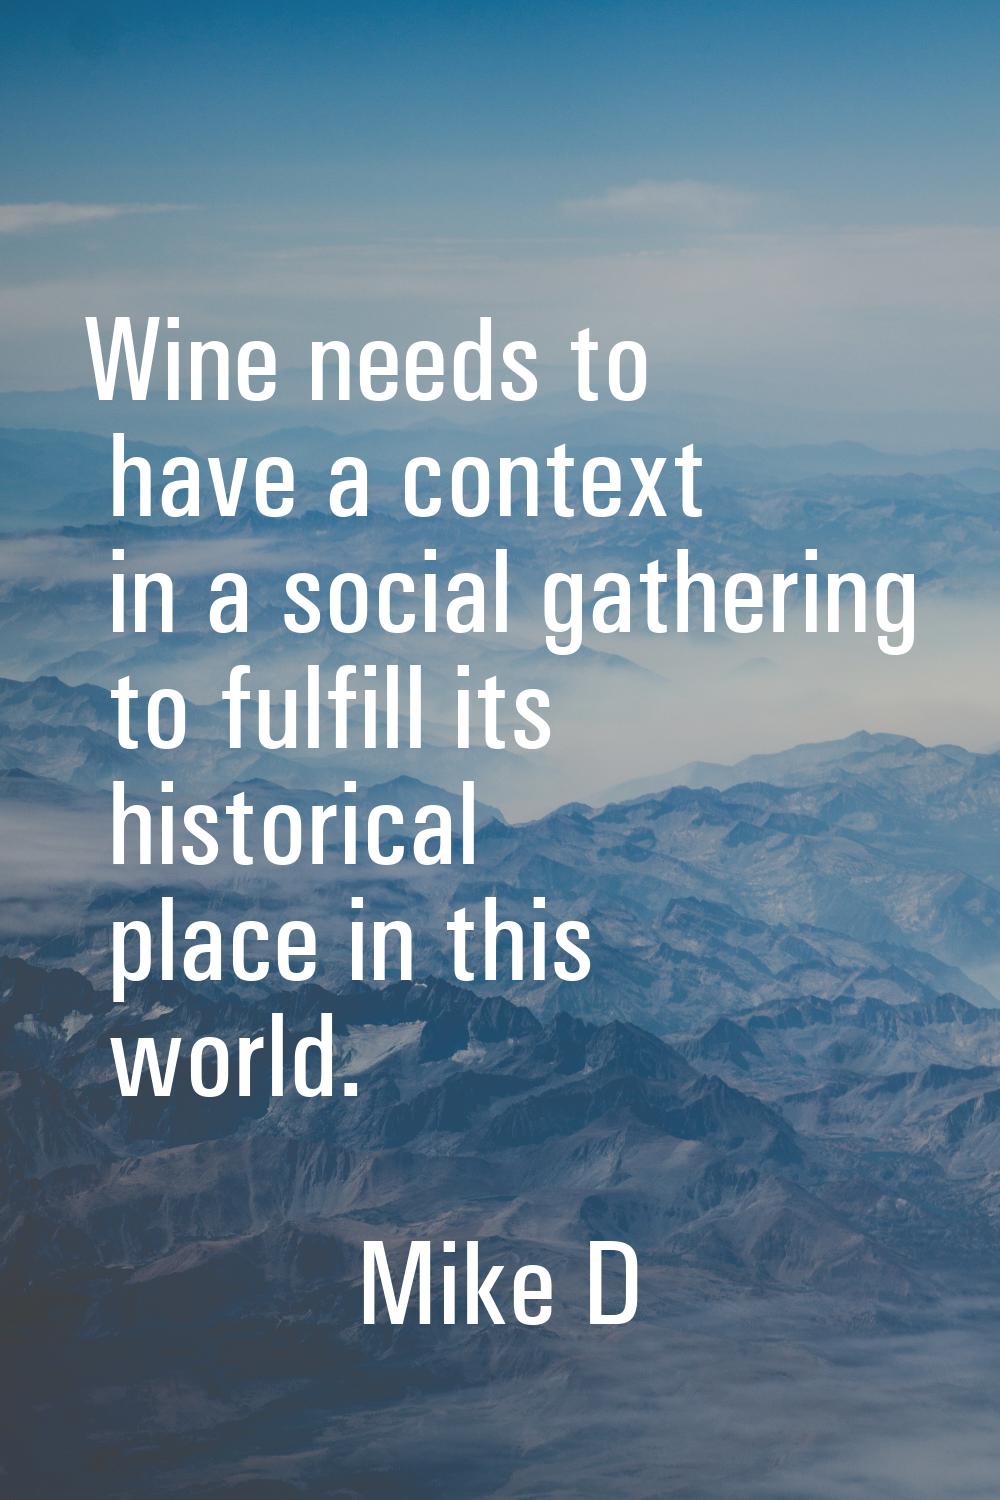 Wine needs to have a context in a social gathering to fulfill its historical place in this world.